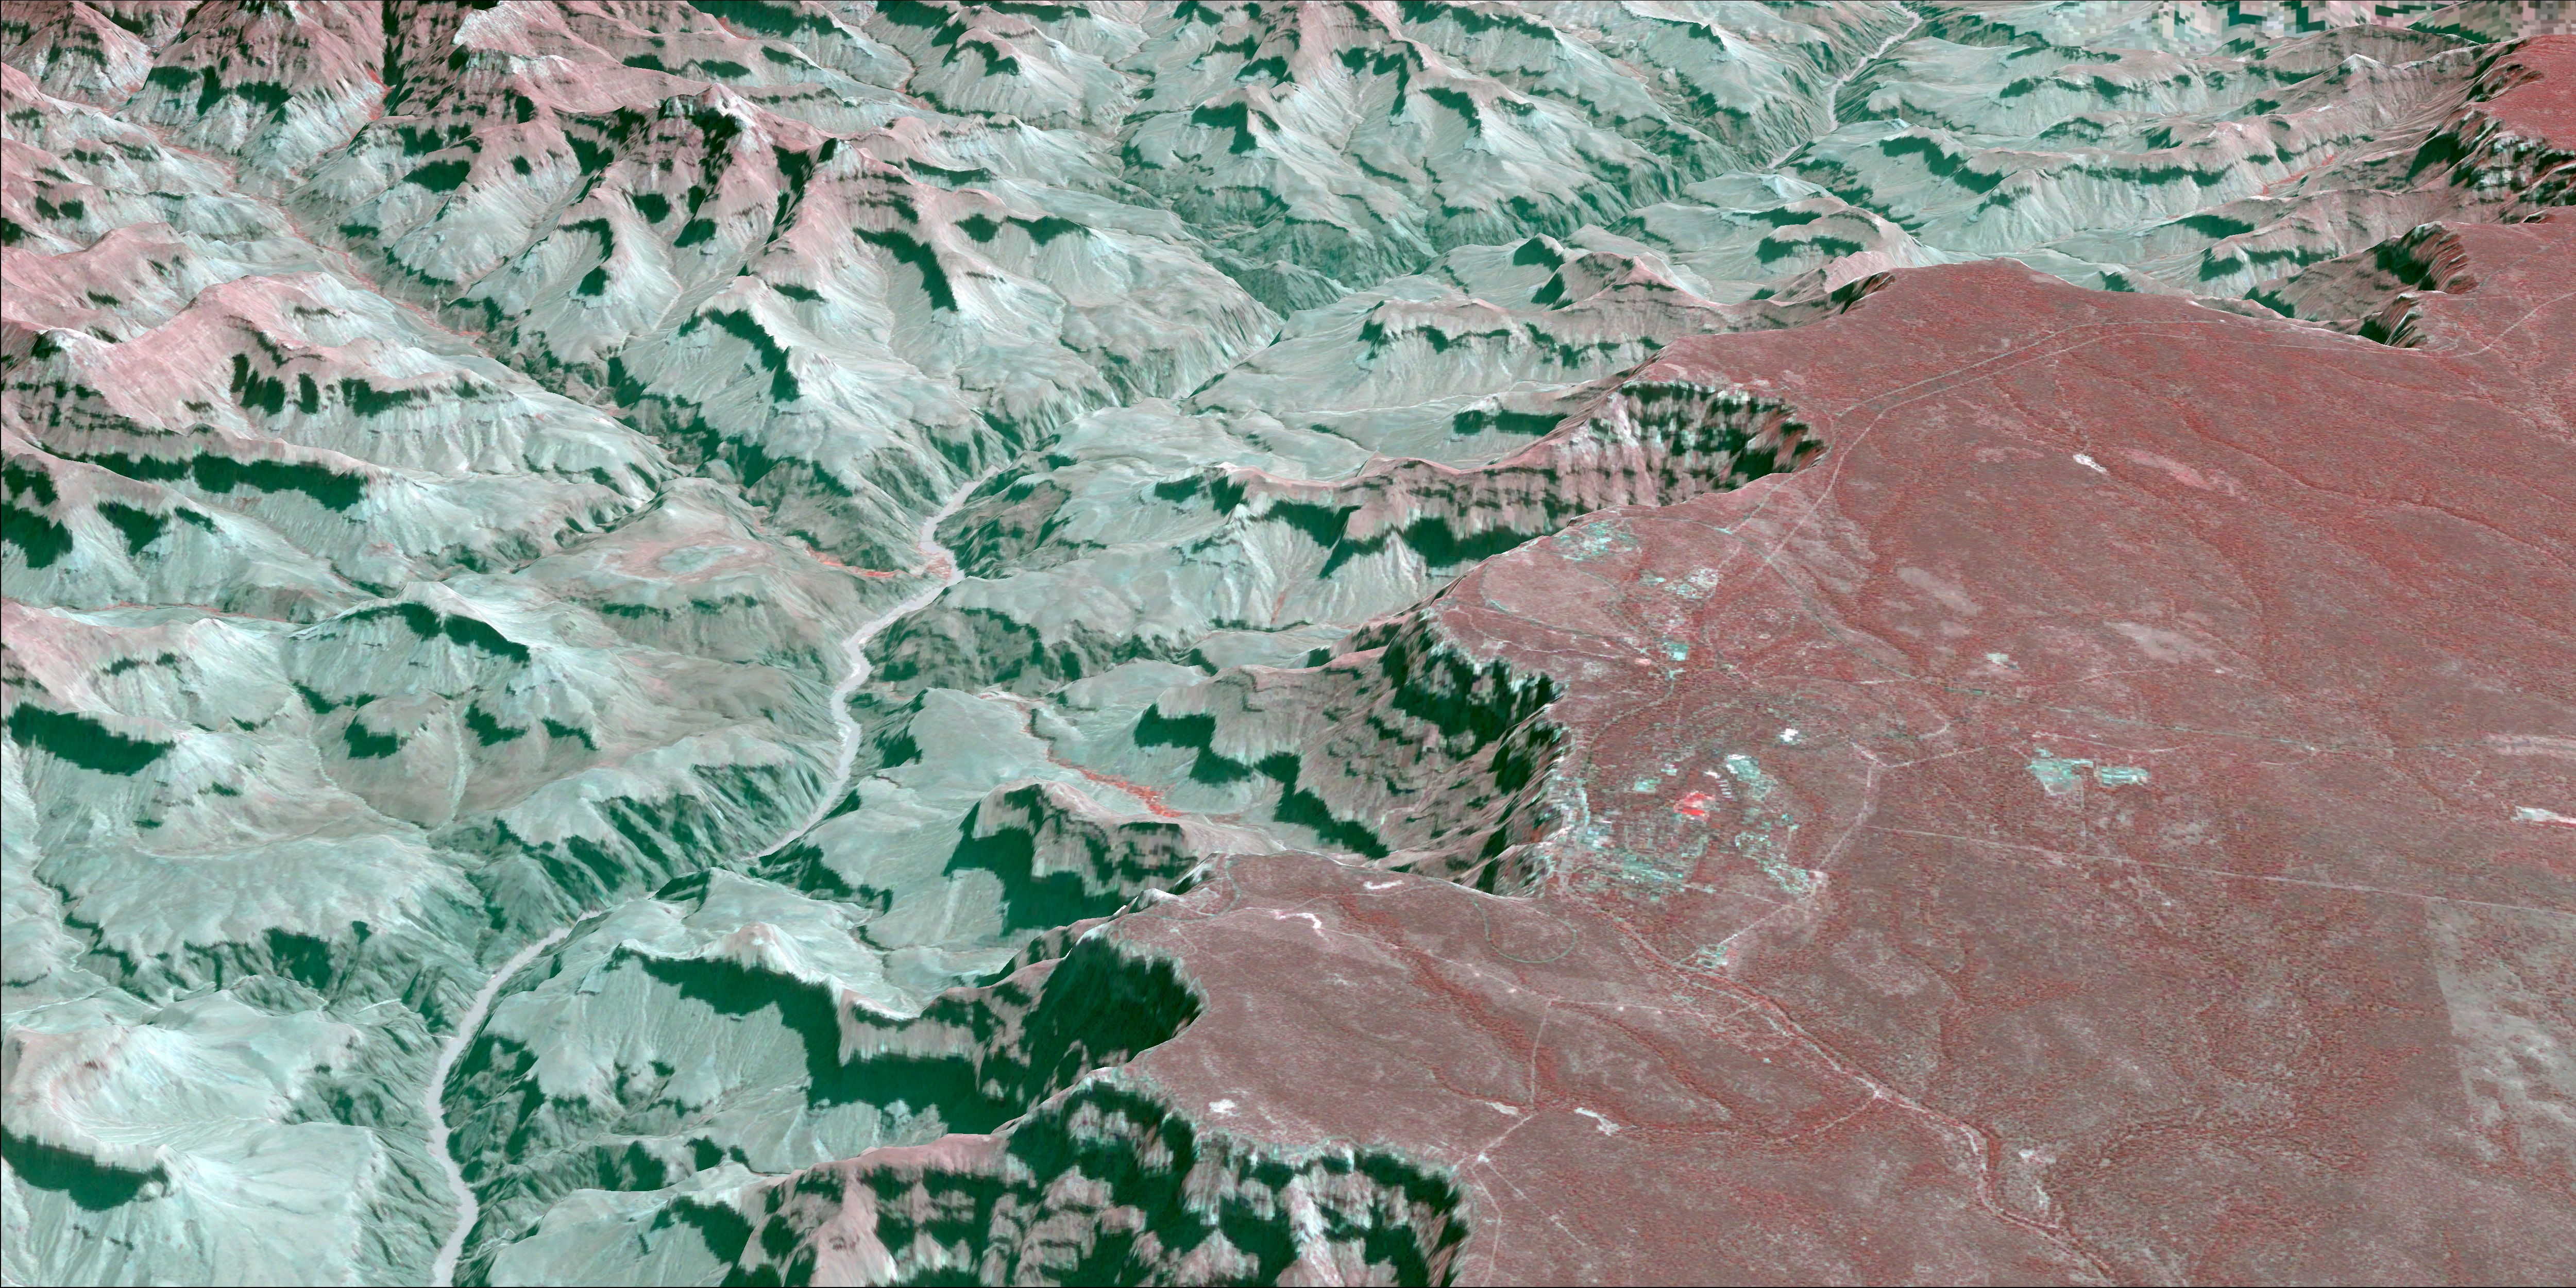 Image of Grand Canyon Village satellite imagery from Planet Data.